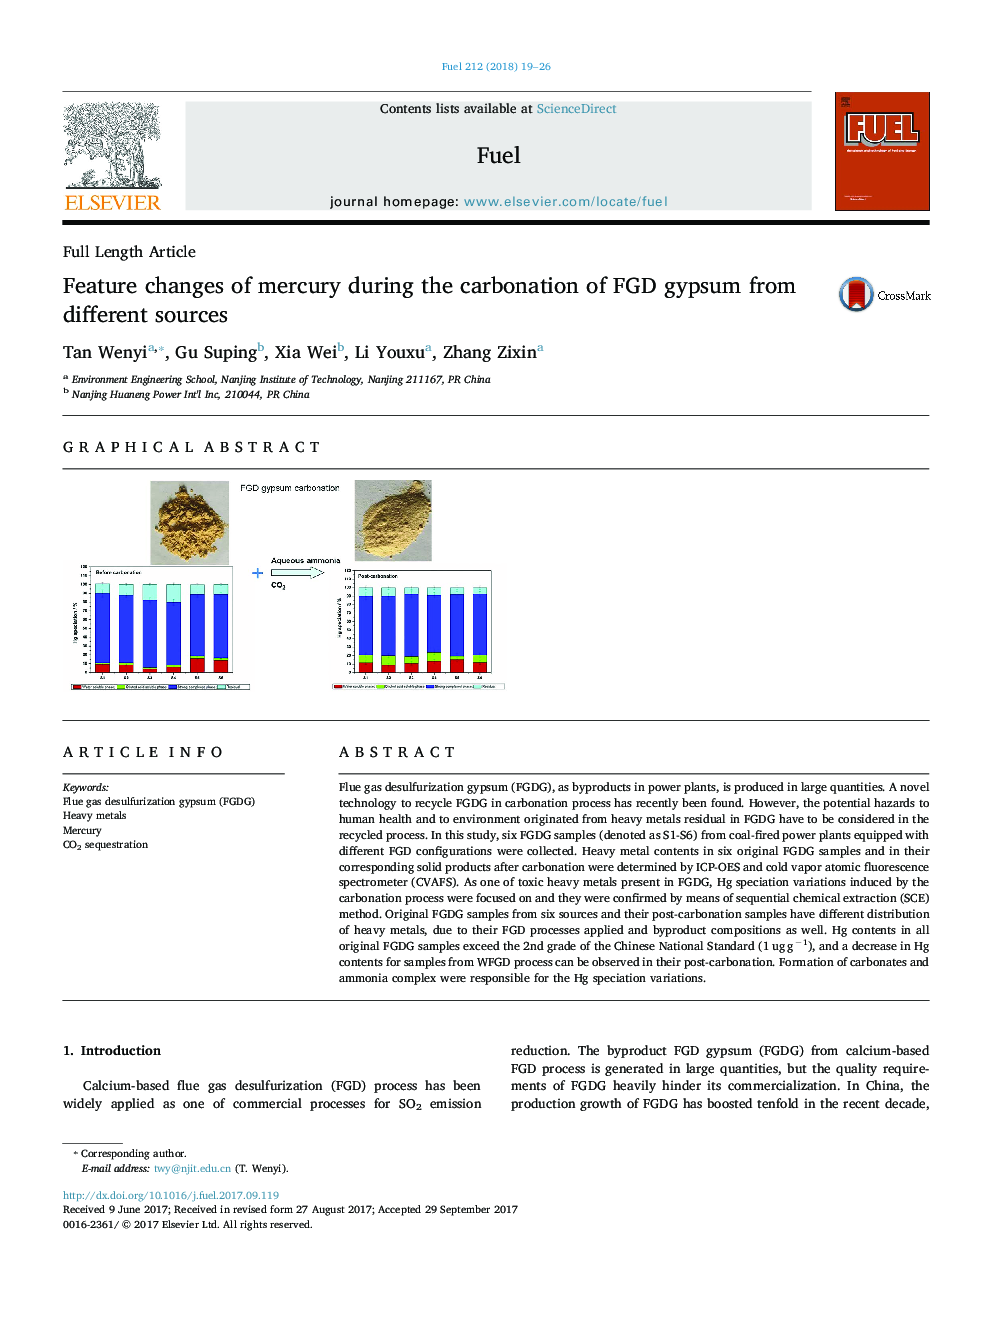 Feature changes of mercury during the carbonation of FGD gypsum from different sources